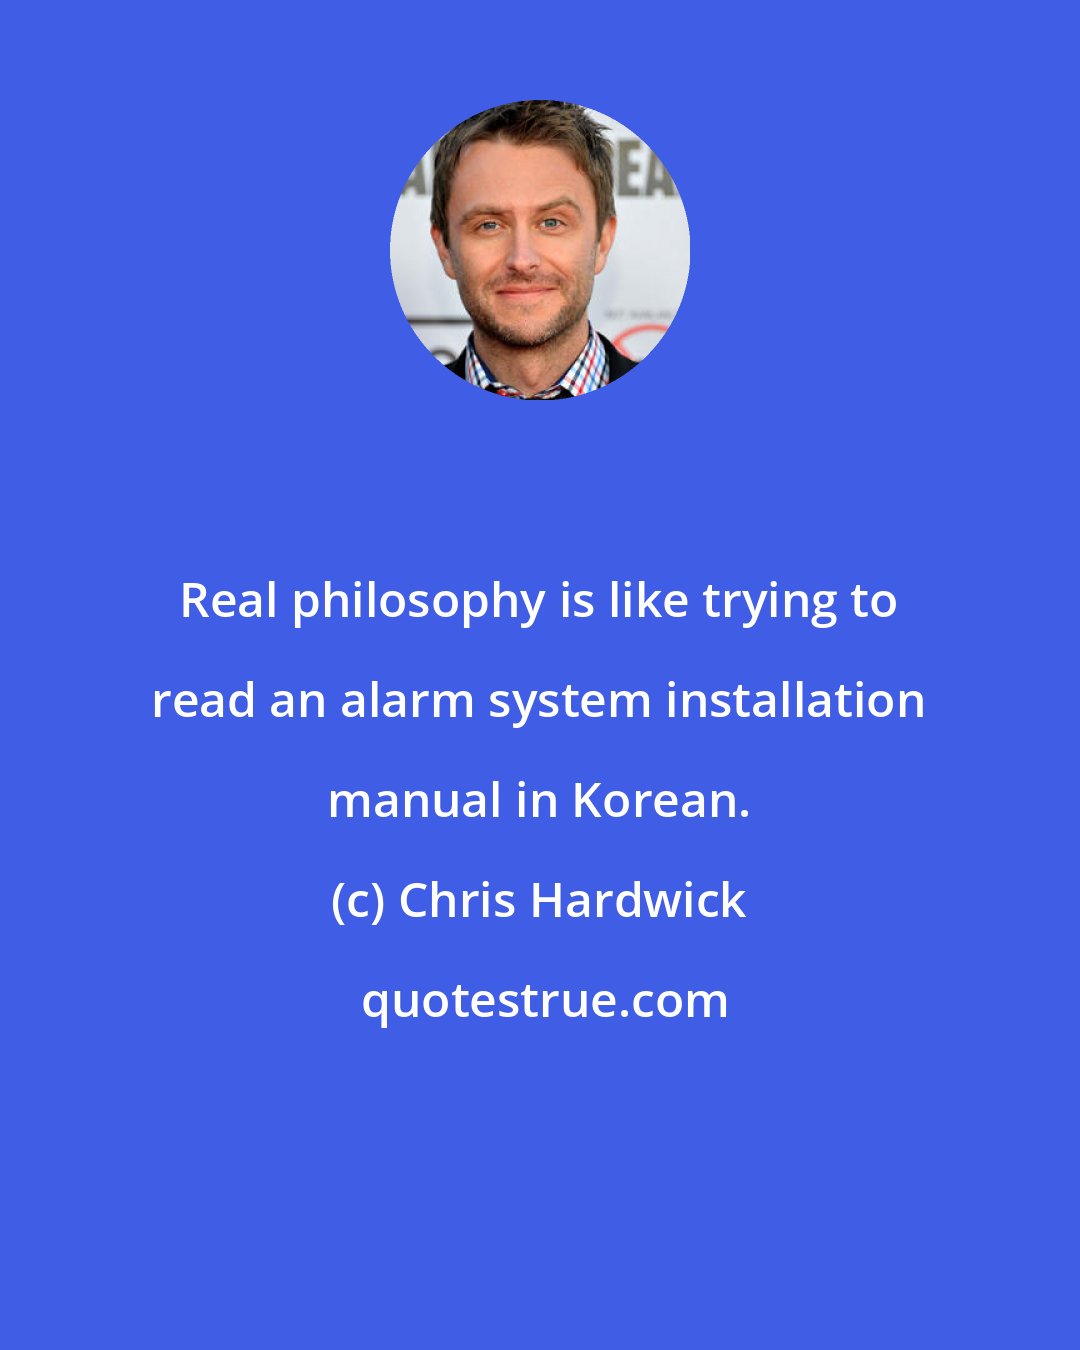 Chris Hardwick: Real philosophy is like trying to read an alarm system installation manual in Korean.